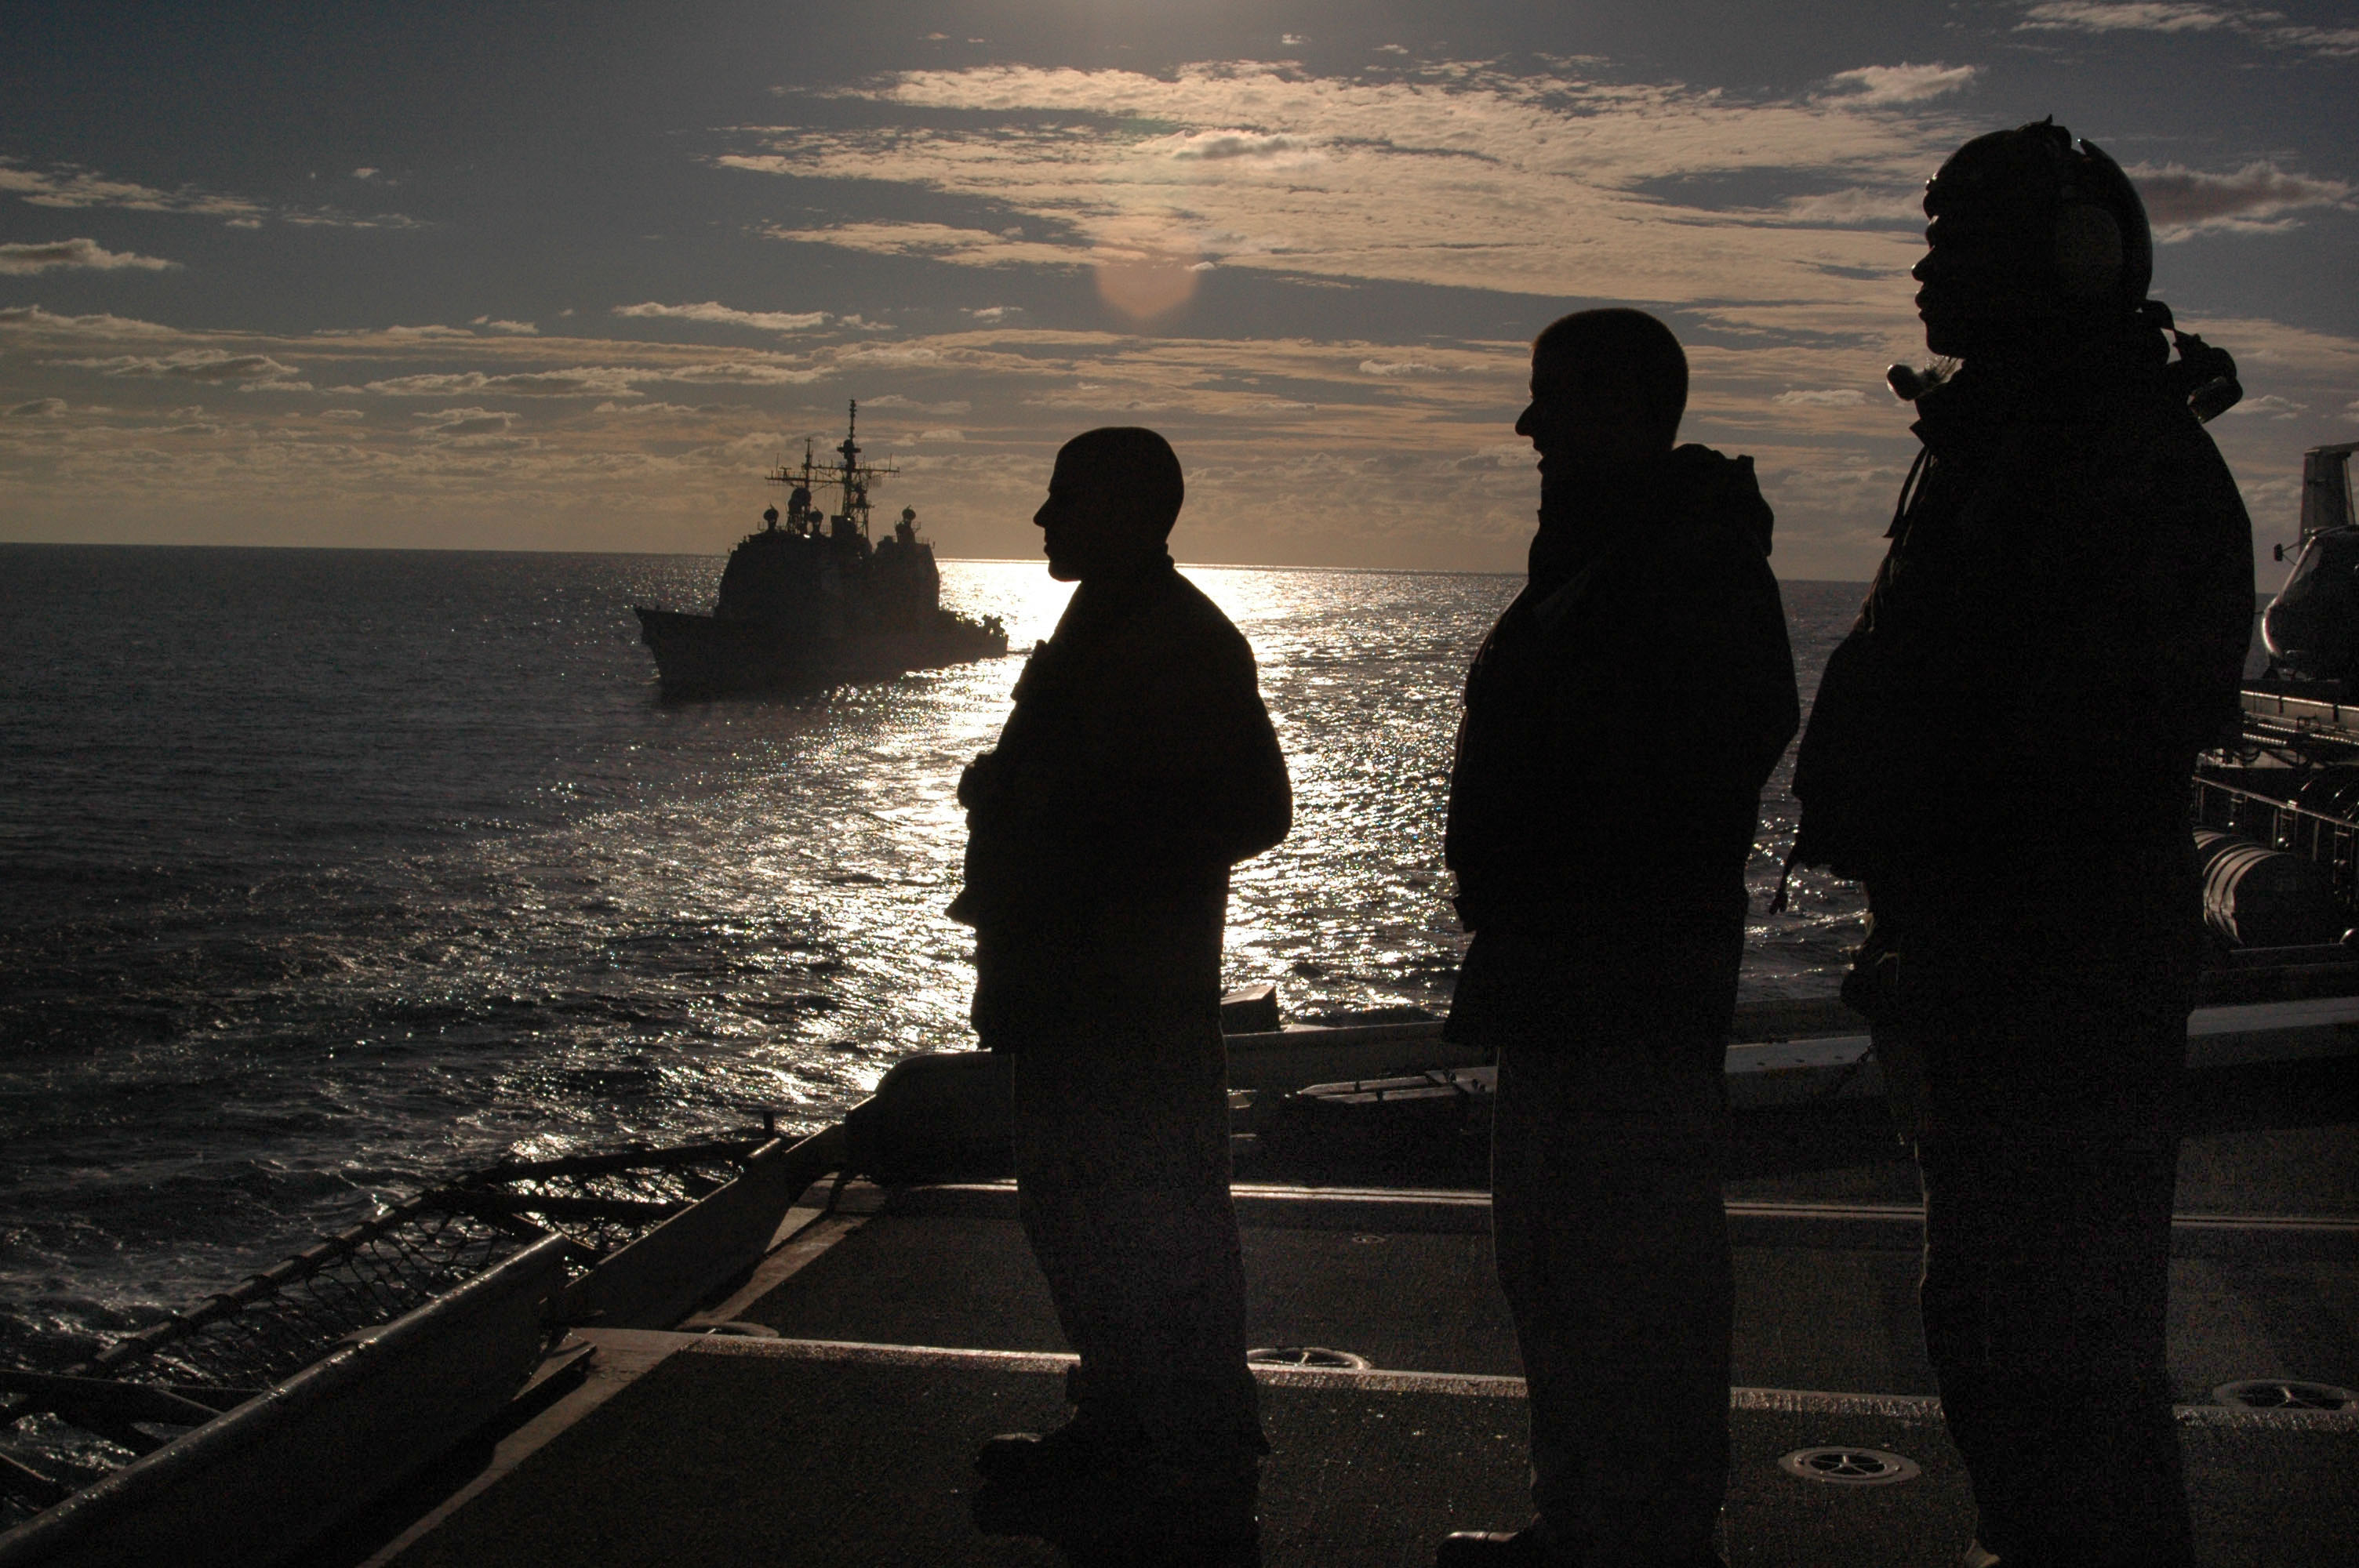 US Navy 050617-N-9551Z-079 Sailors observe a replenishment at sea from the flight deck aboard the conventionally powered aircraft carrier USS Kitty Hawk (CV 63)